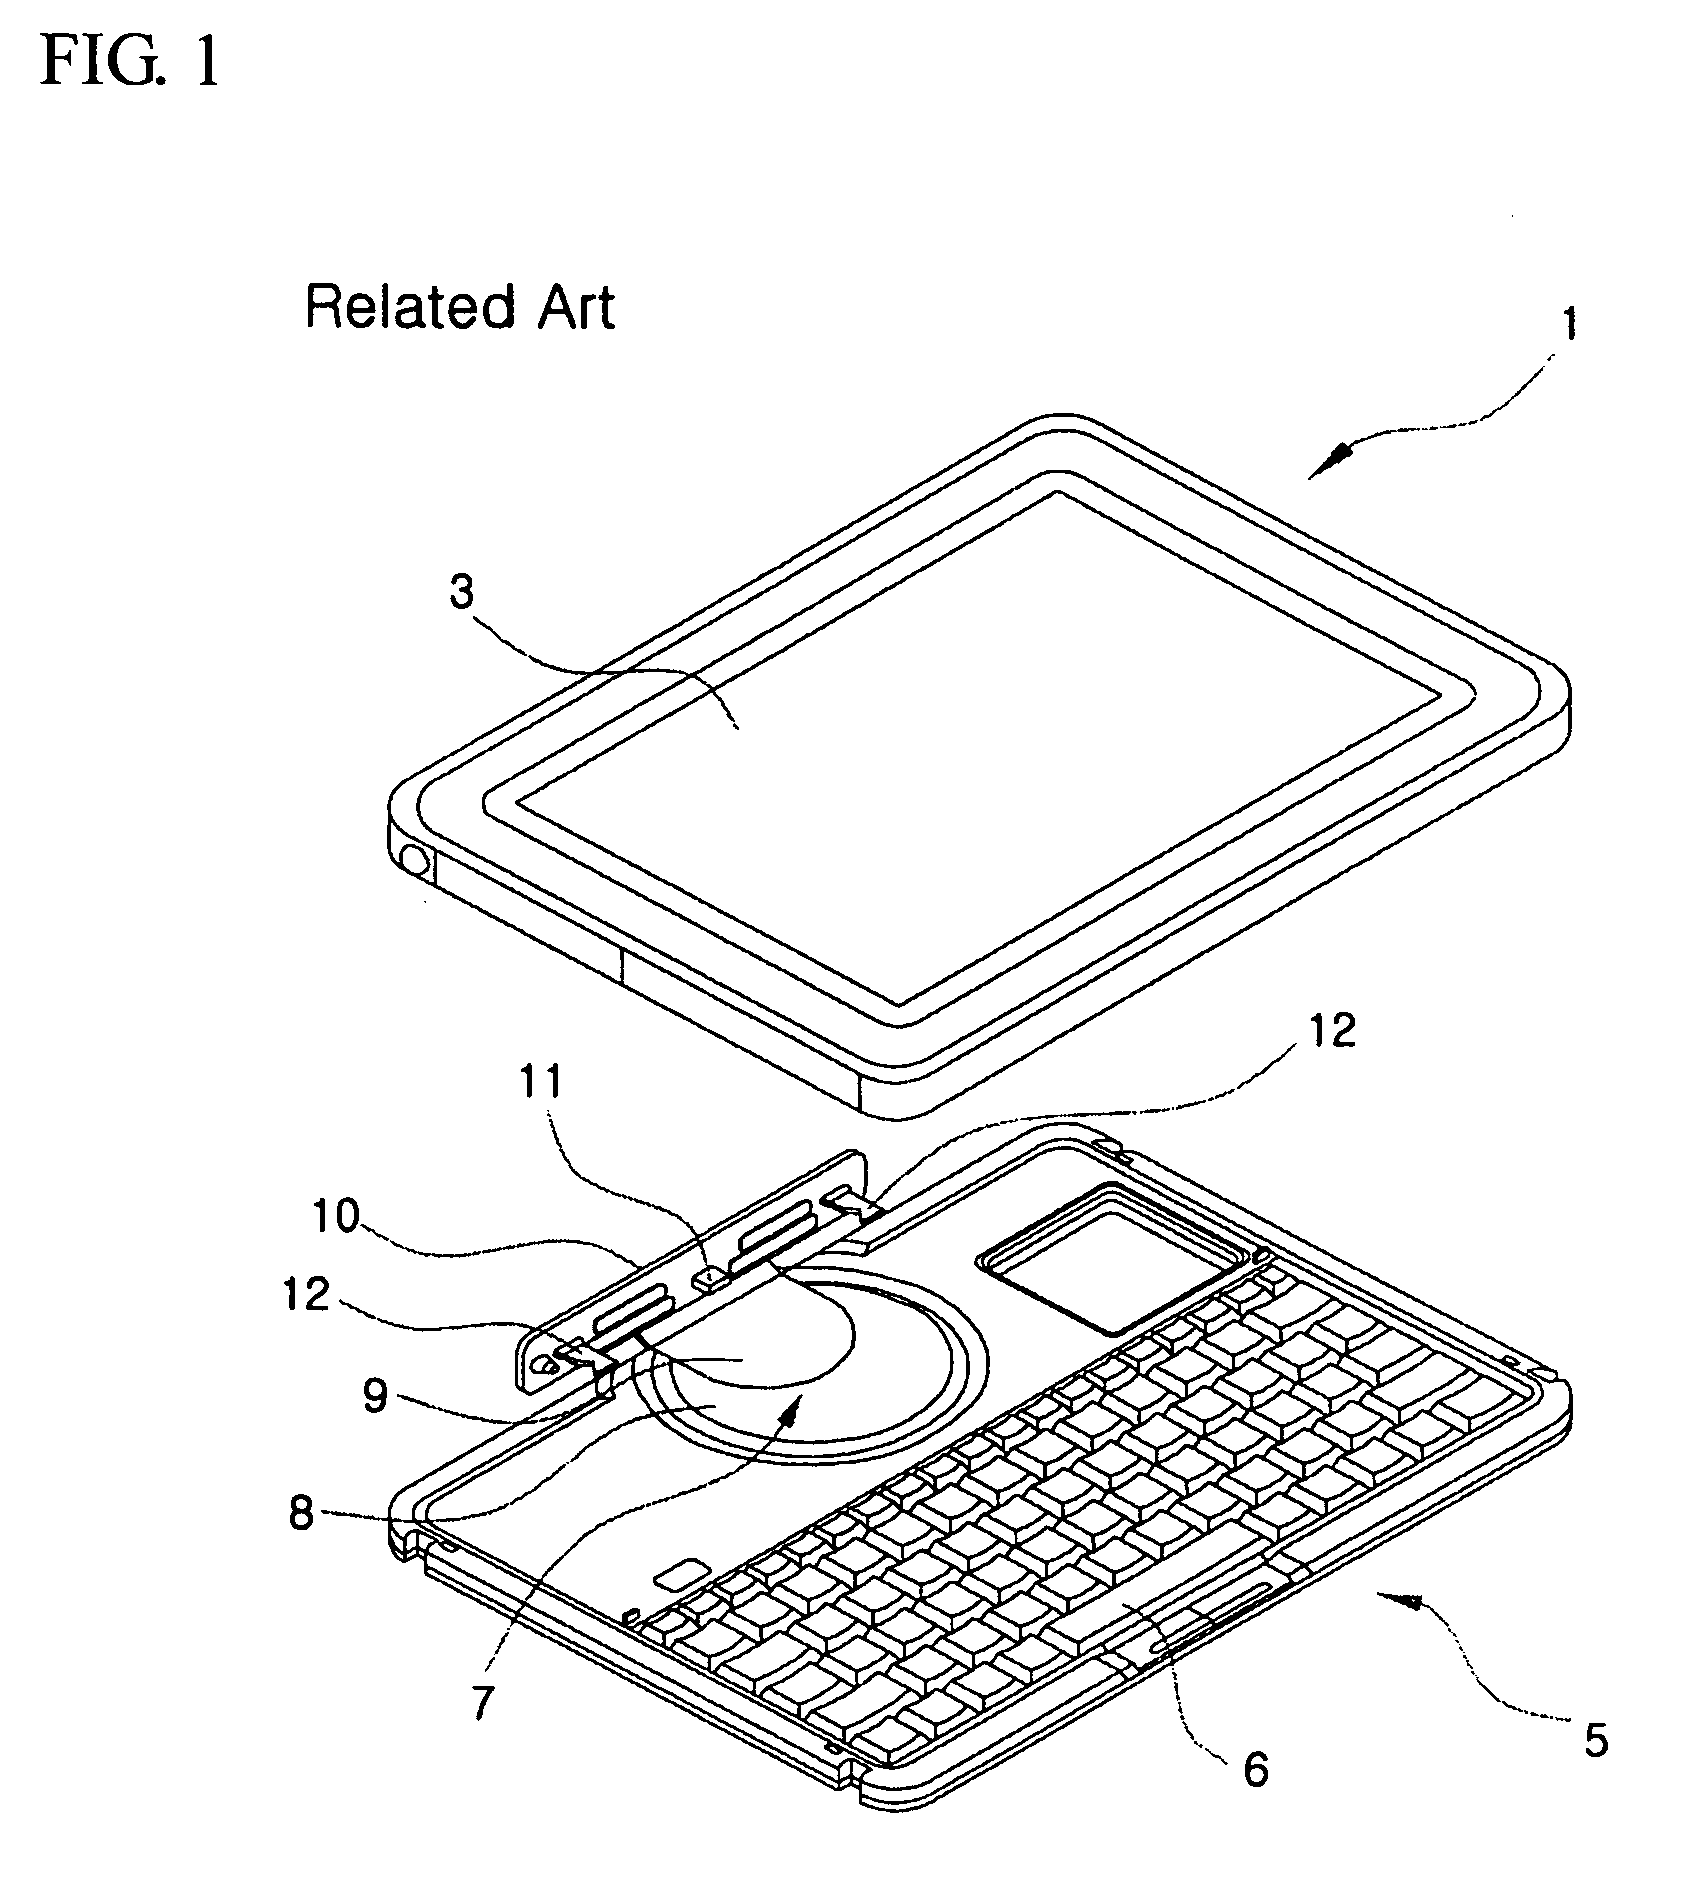 Supporting apparatus for portable computer